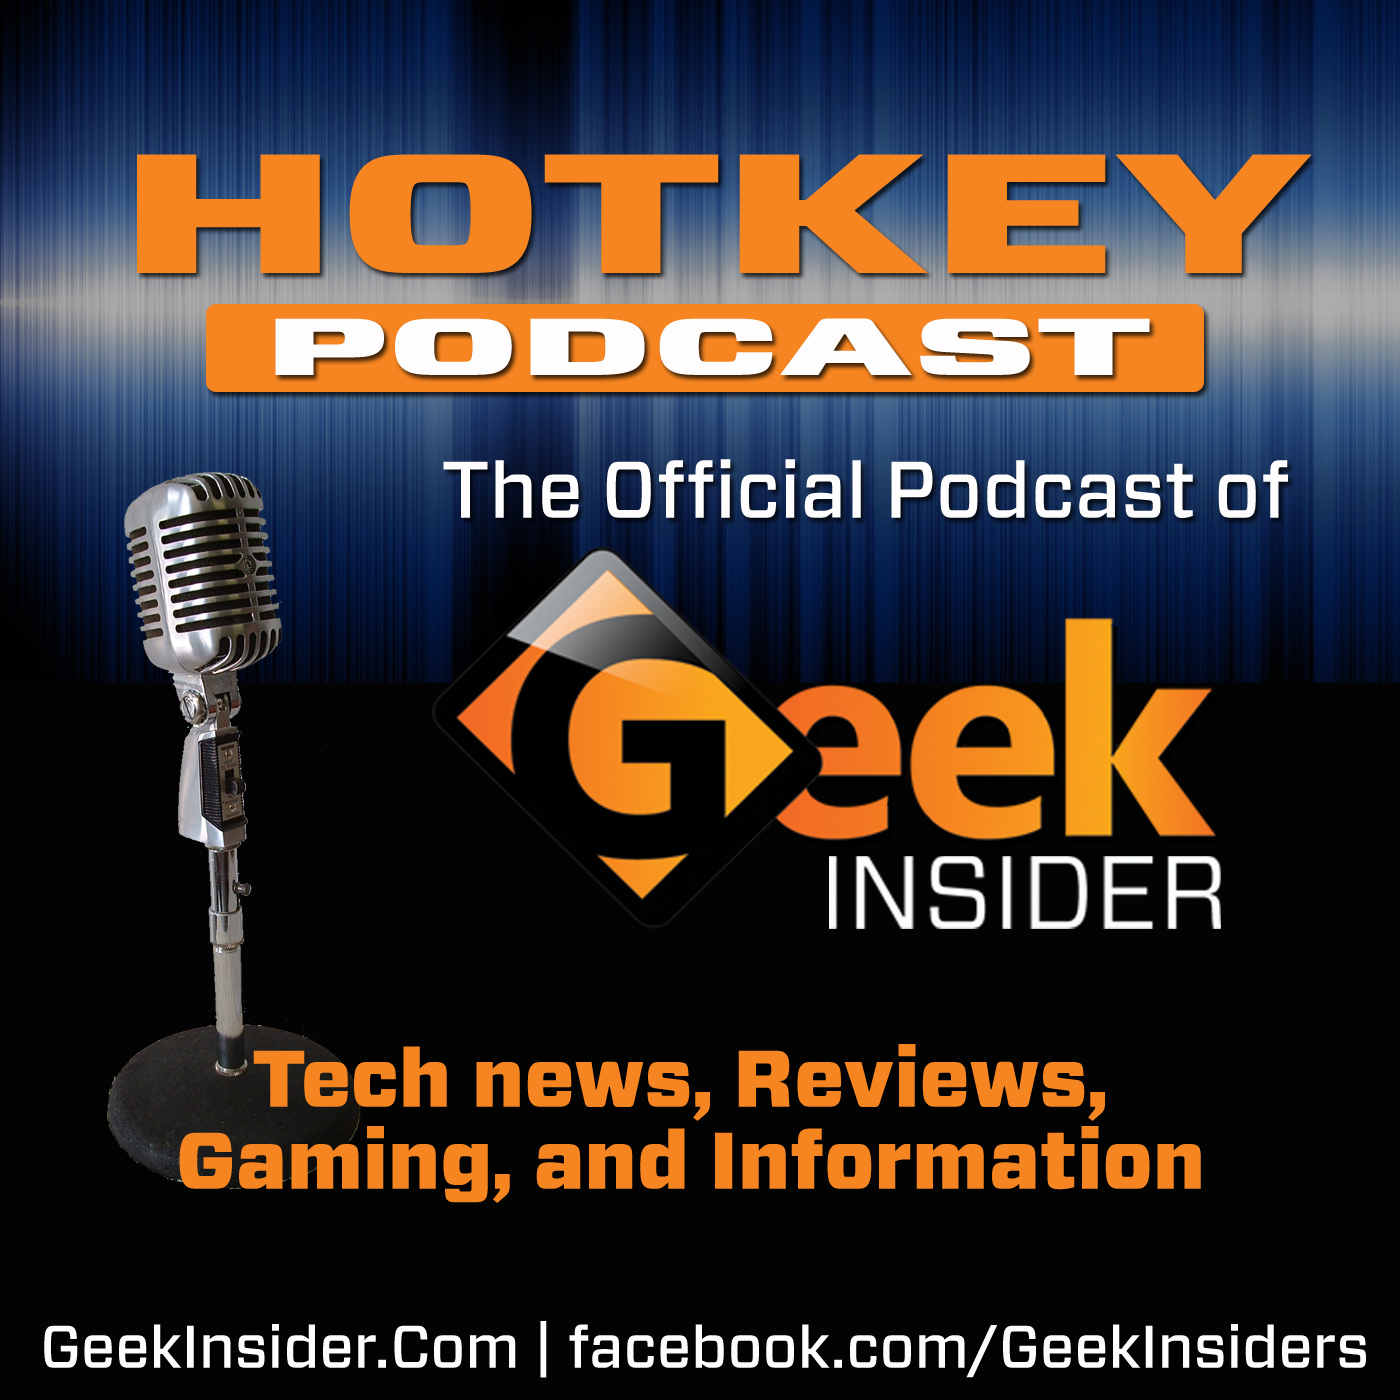 Geek insider, geekinsider, geekinsider. Com,, hotkey: the official podcast of geek insider #5 – 09. 11. 13, podcasts